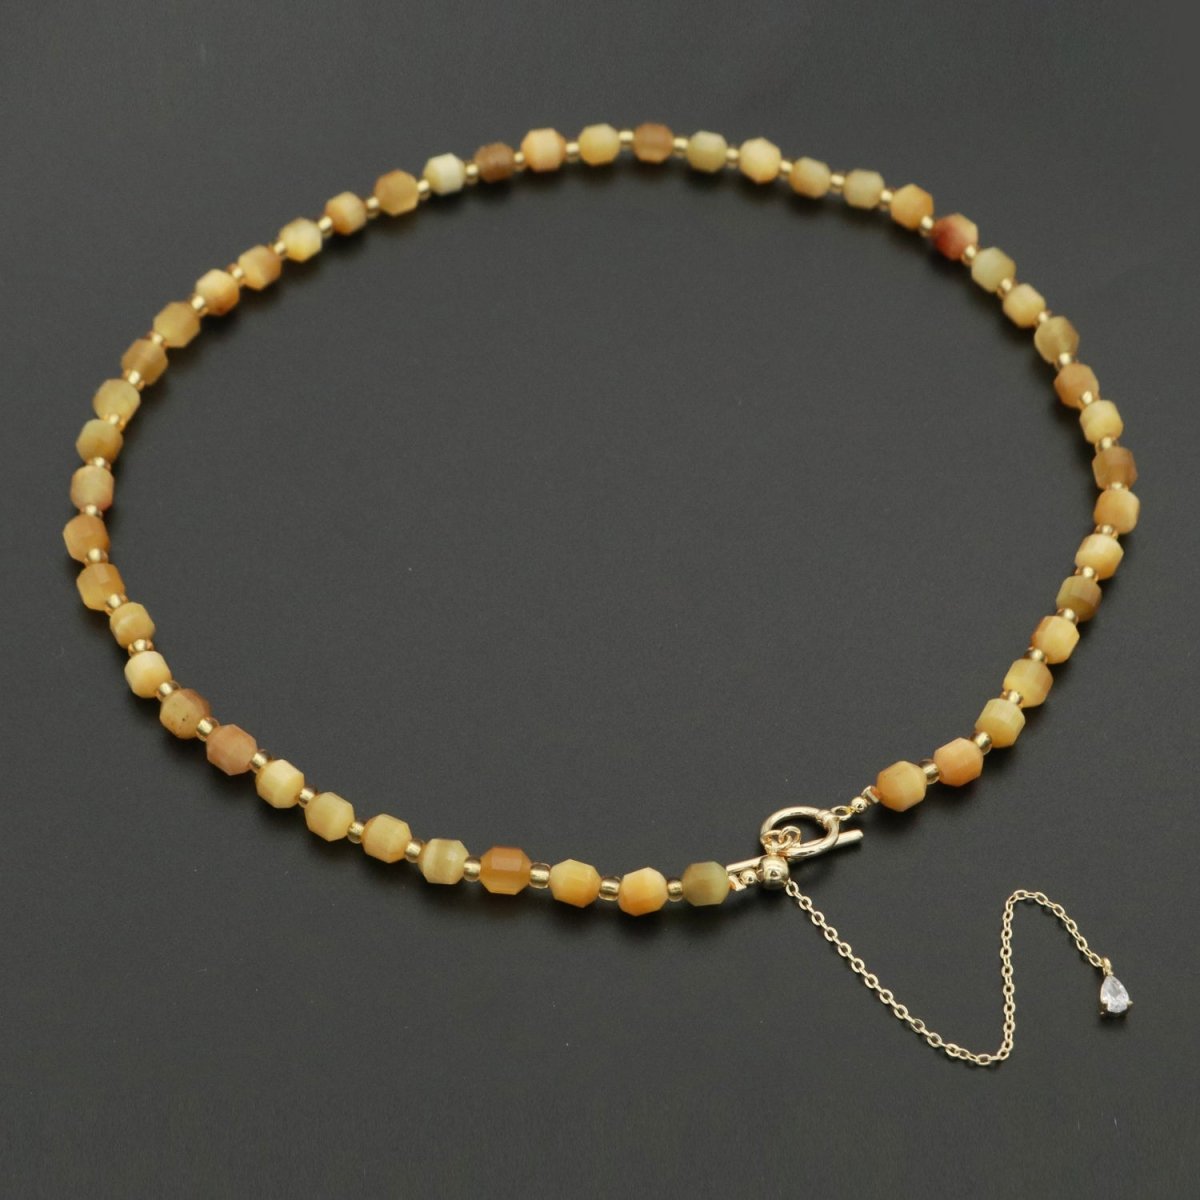 5.5mm Tiger Eye Natural Gemstone Bead 16.5 Inch Choker Necklace w. Toggle Clasps | WA-249 Clearance Pricing - DLUXCA